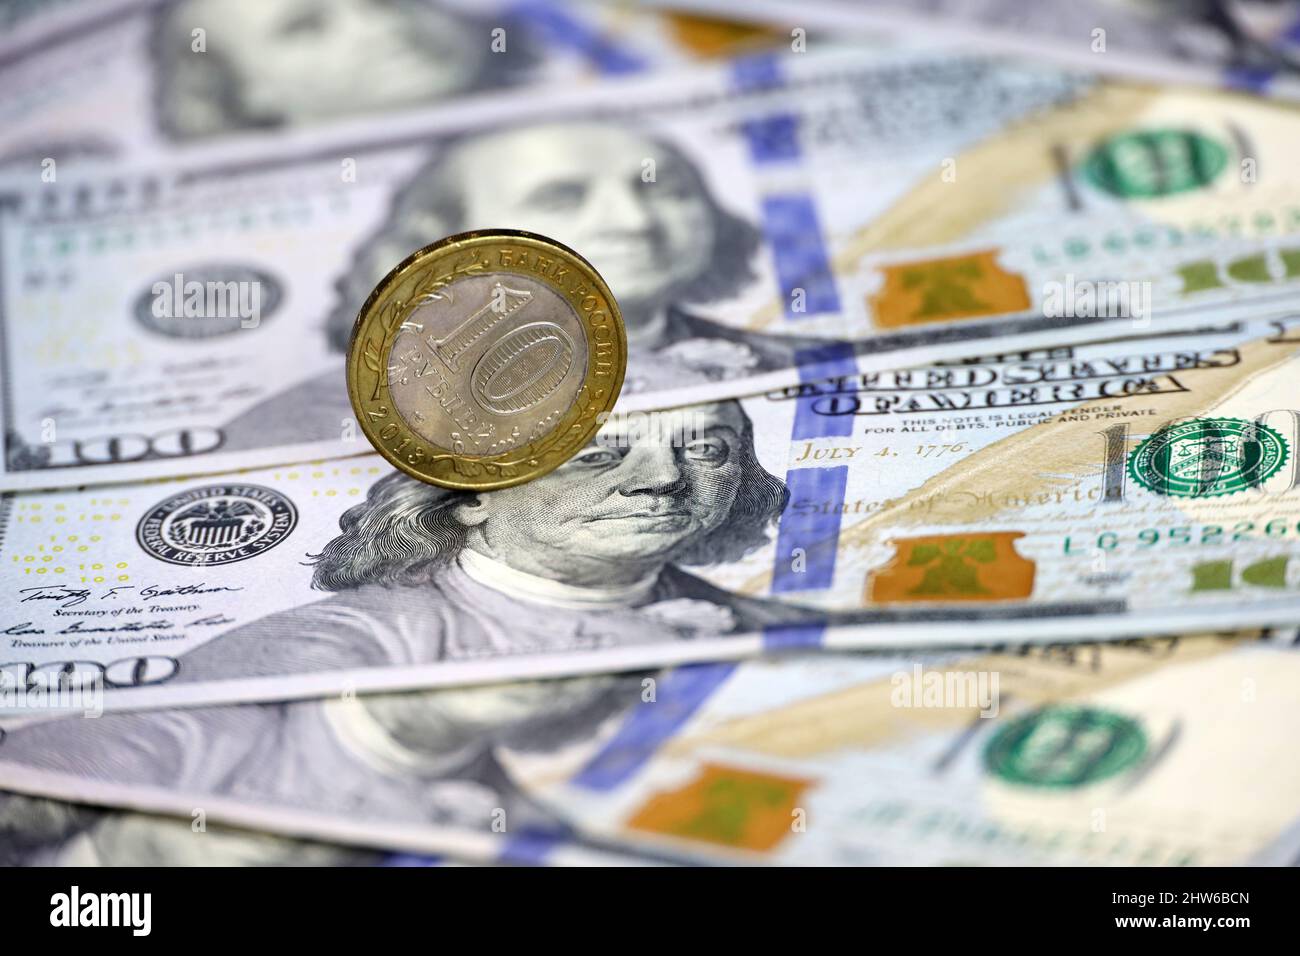 Russian rubles coin on background of US dollars. Concept of exchange rate, sanctions, falling ruble Stock Photo